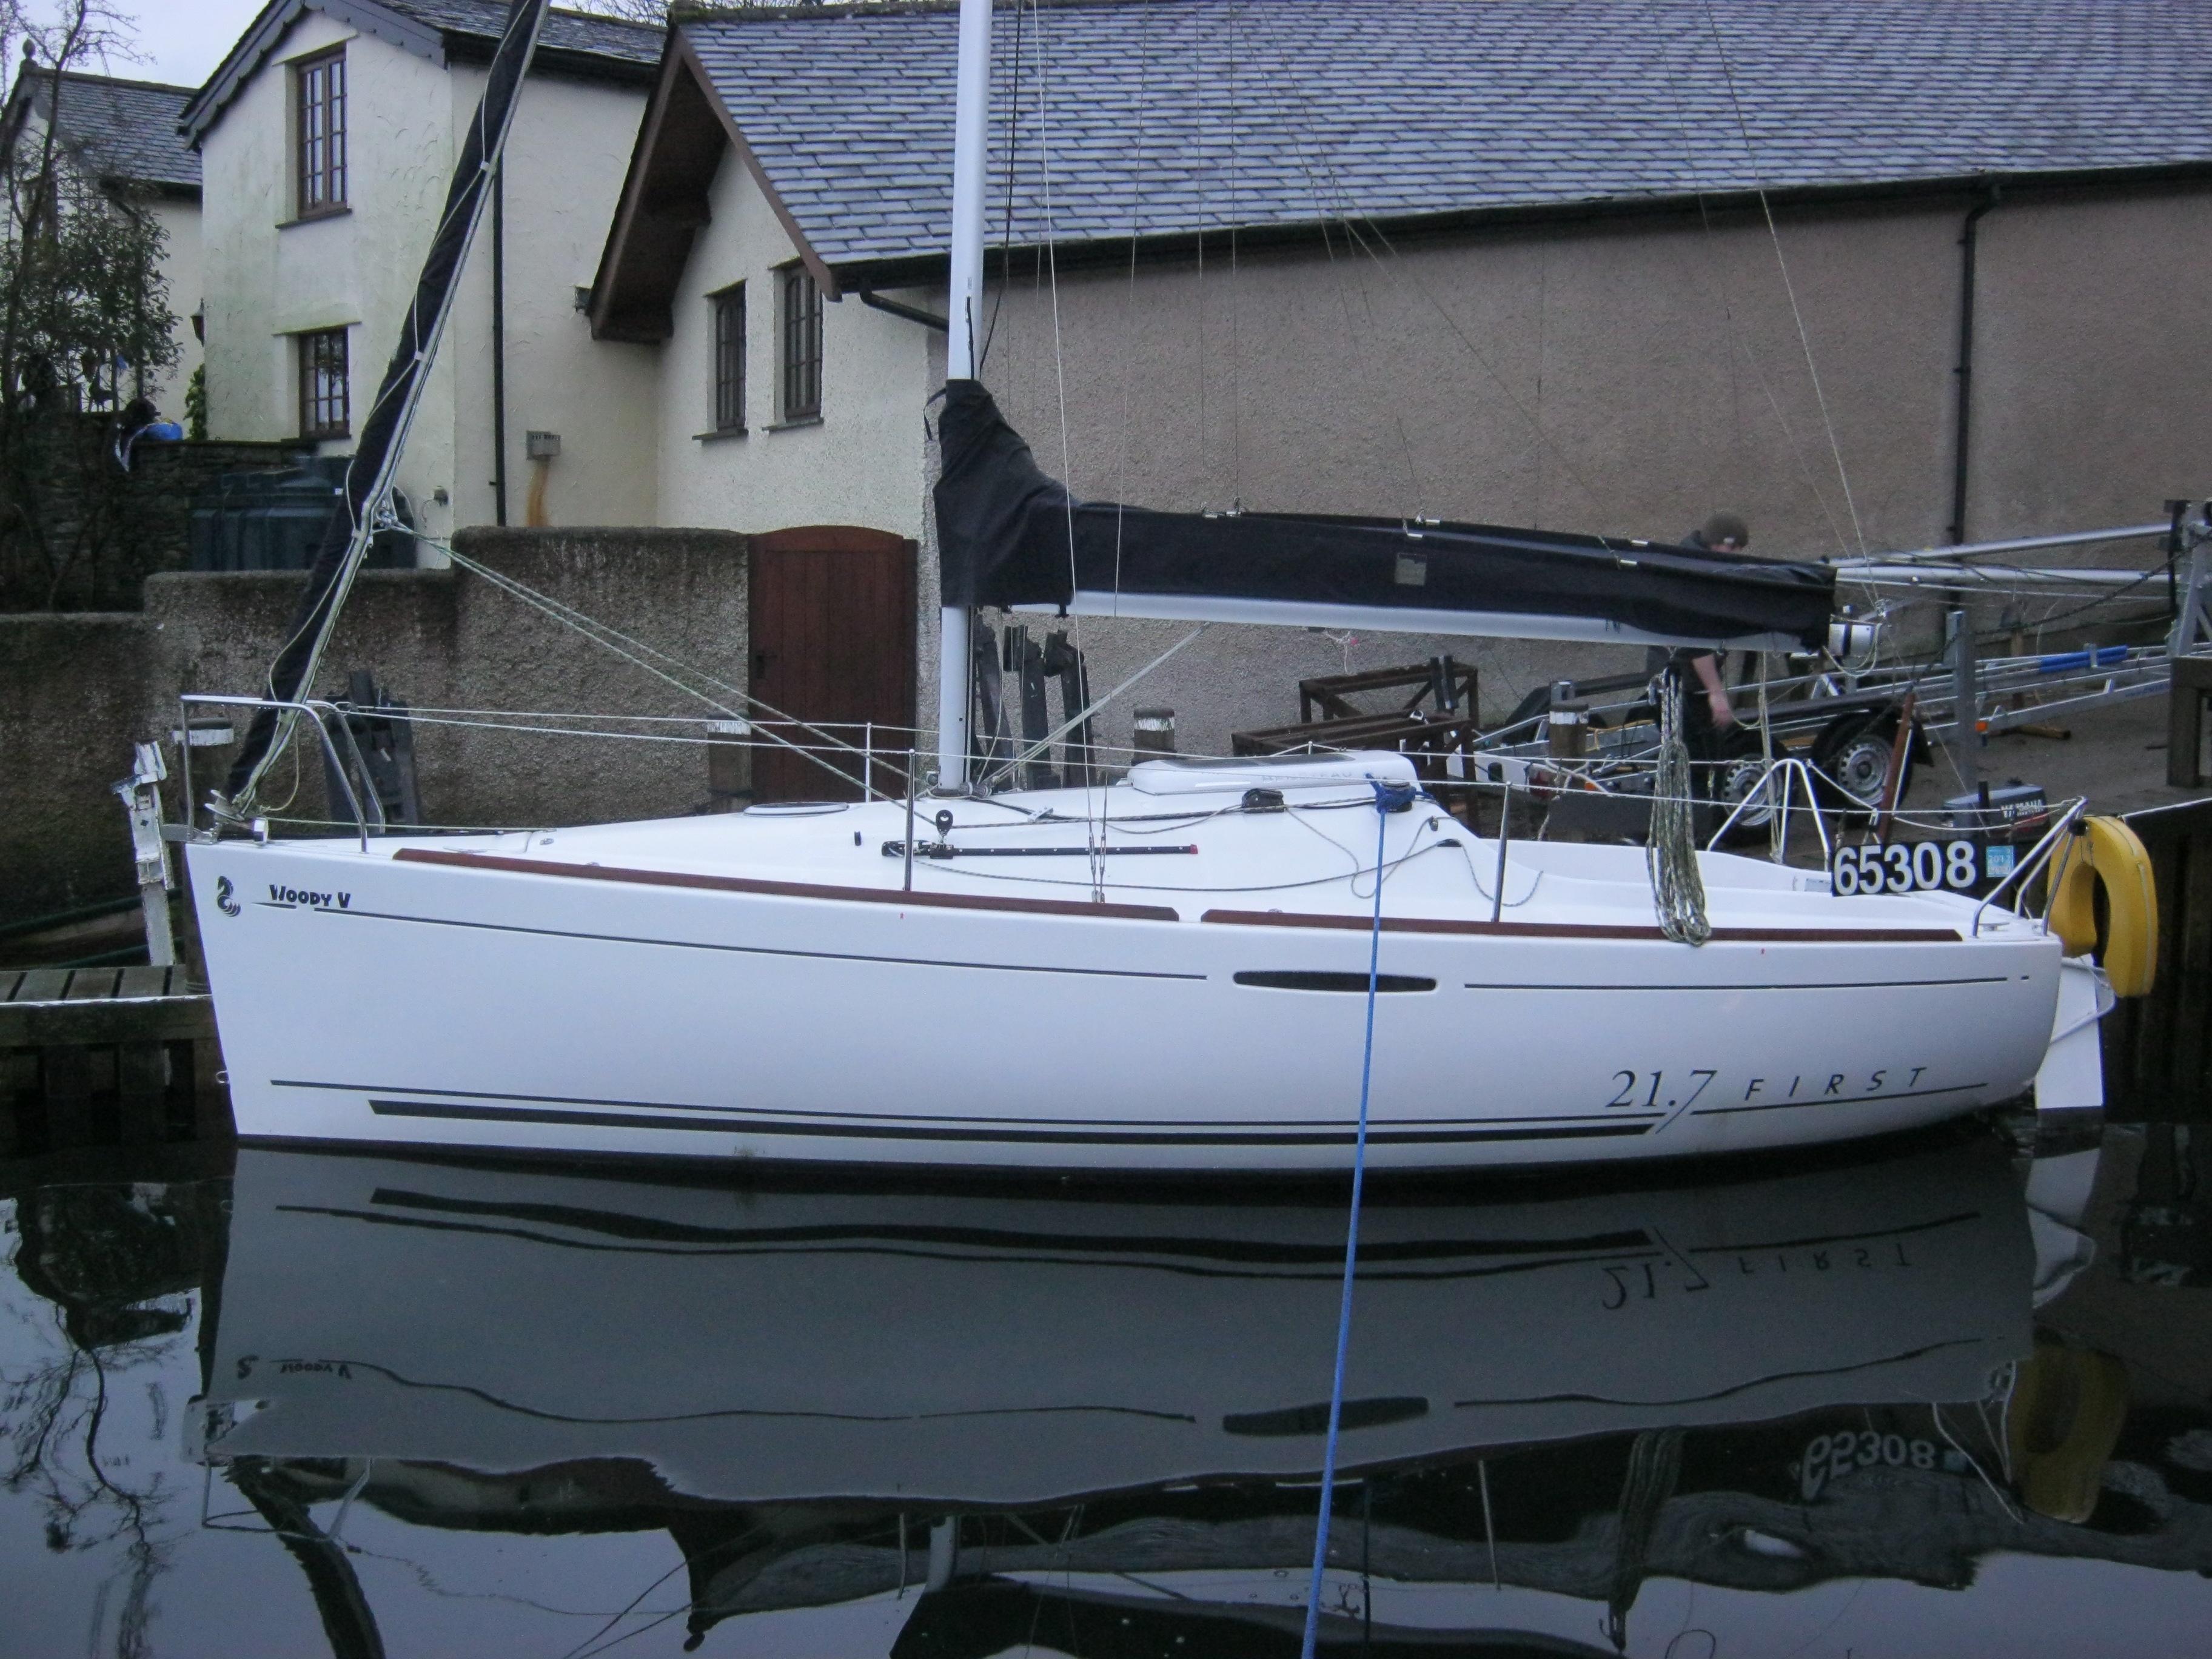 Beneteau First 21.7, Bowness on Windermere, Cumbria